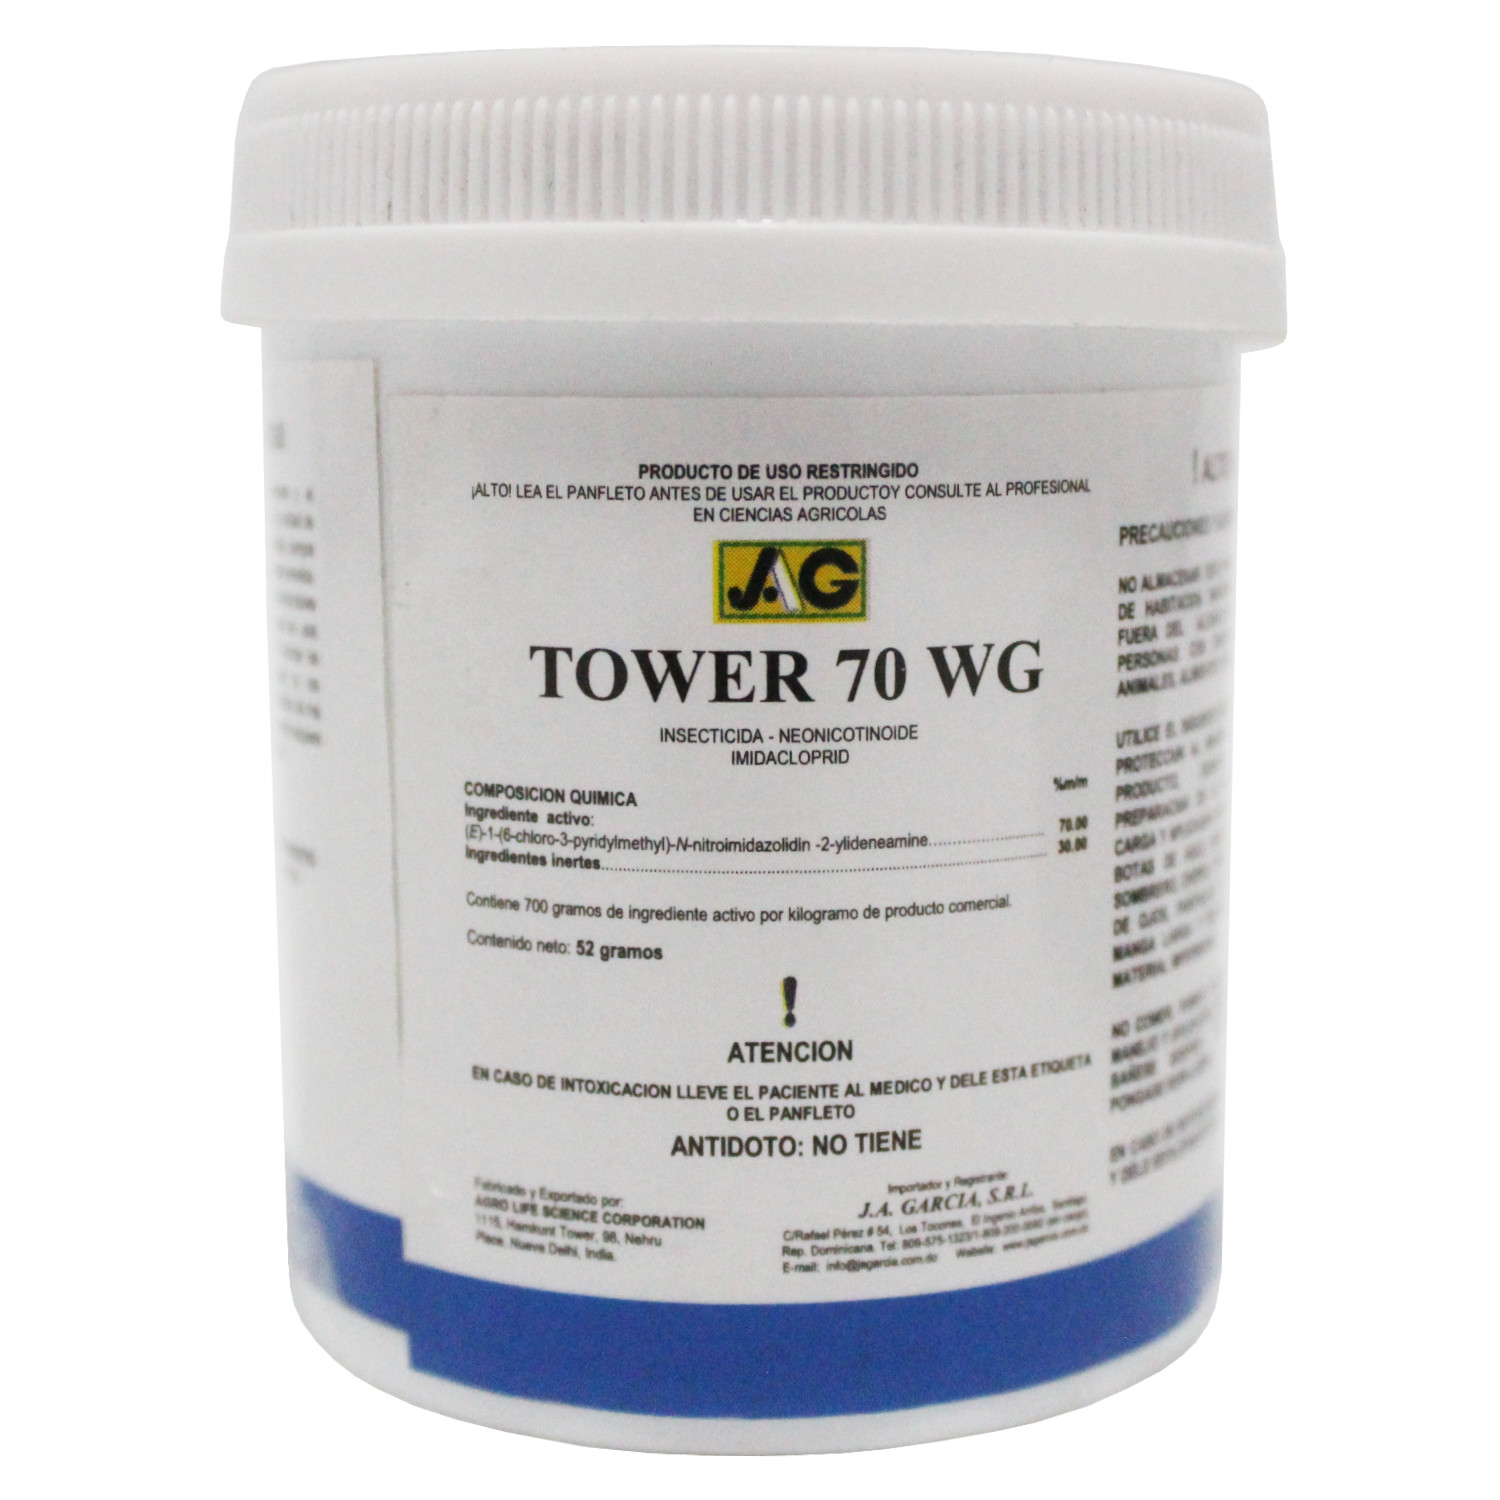 Tower 70 Wg (Insecticida)